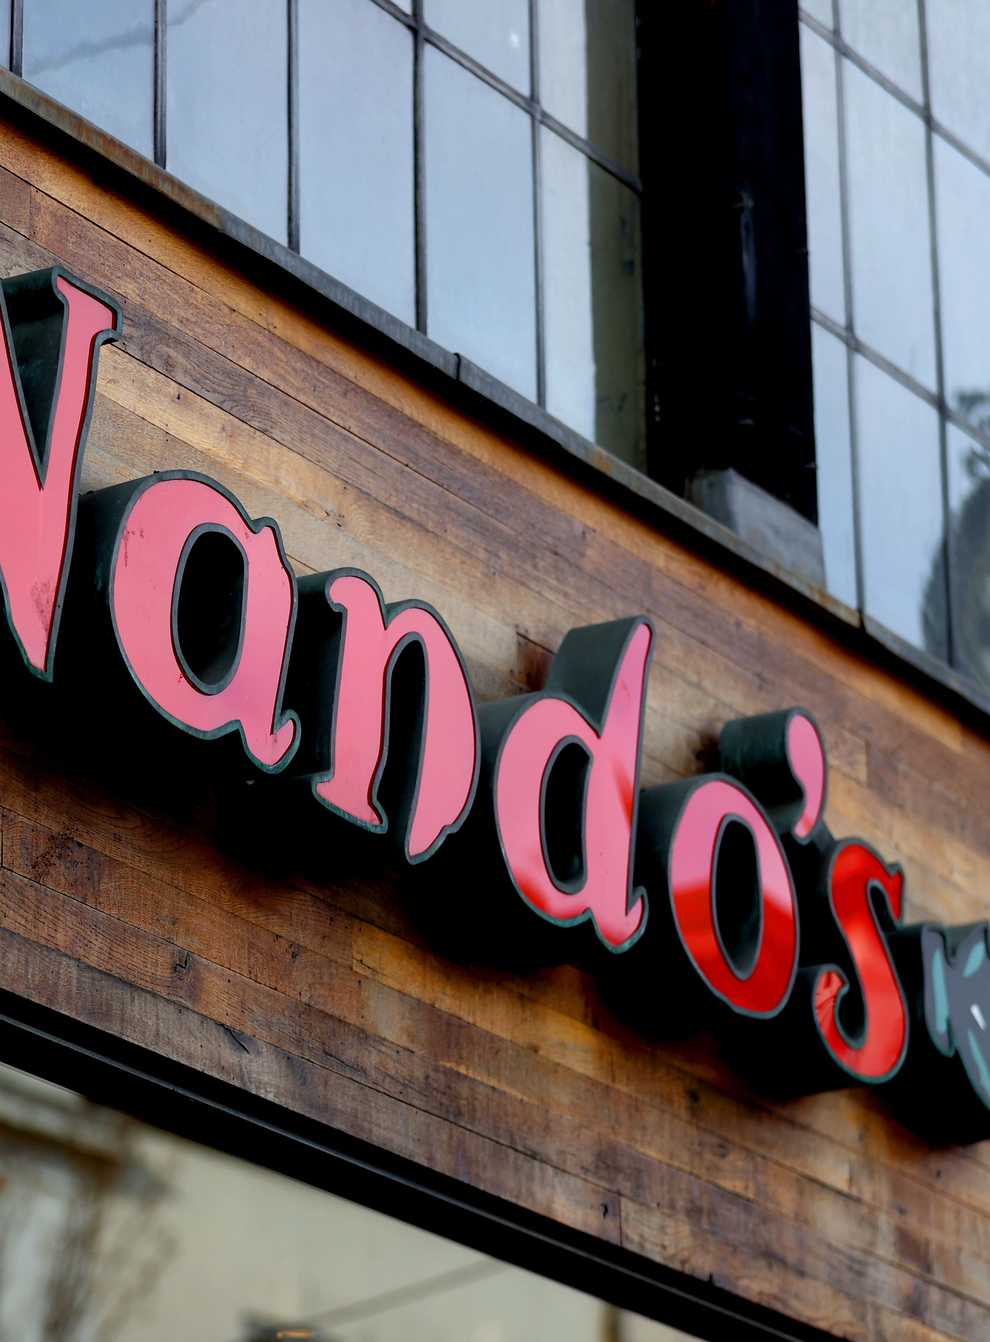 Nando’s has heavily cut its losses but said its return to profit has been slowed by inflationary pressures (Tim Goode/PA)